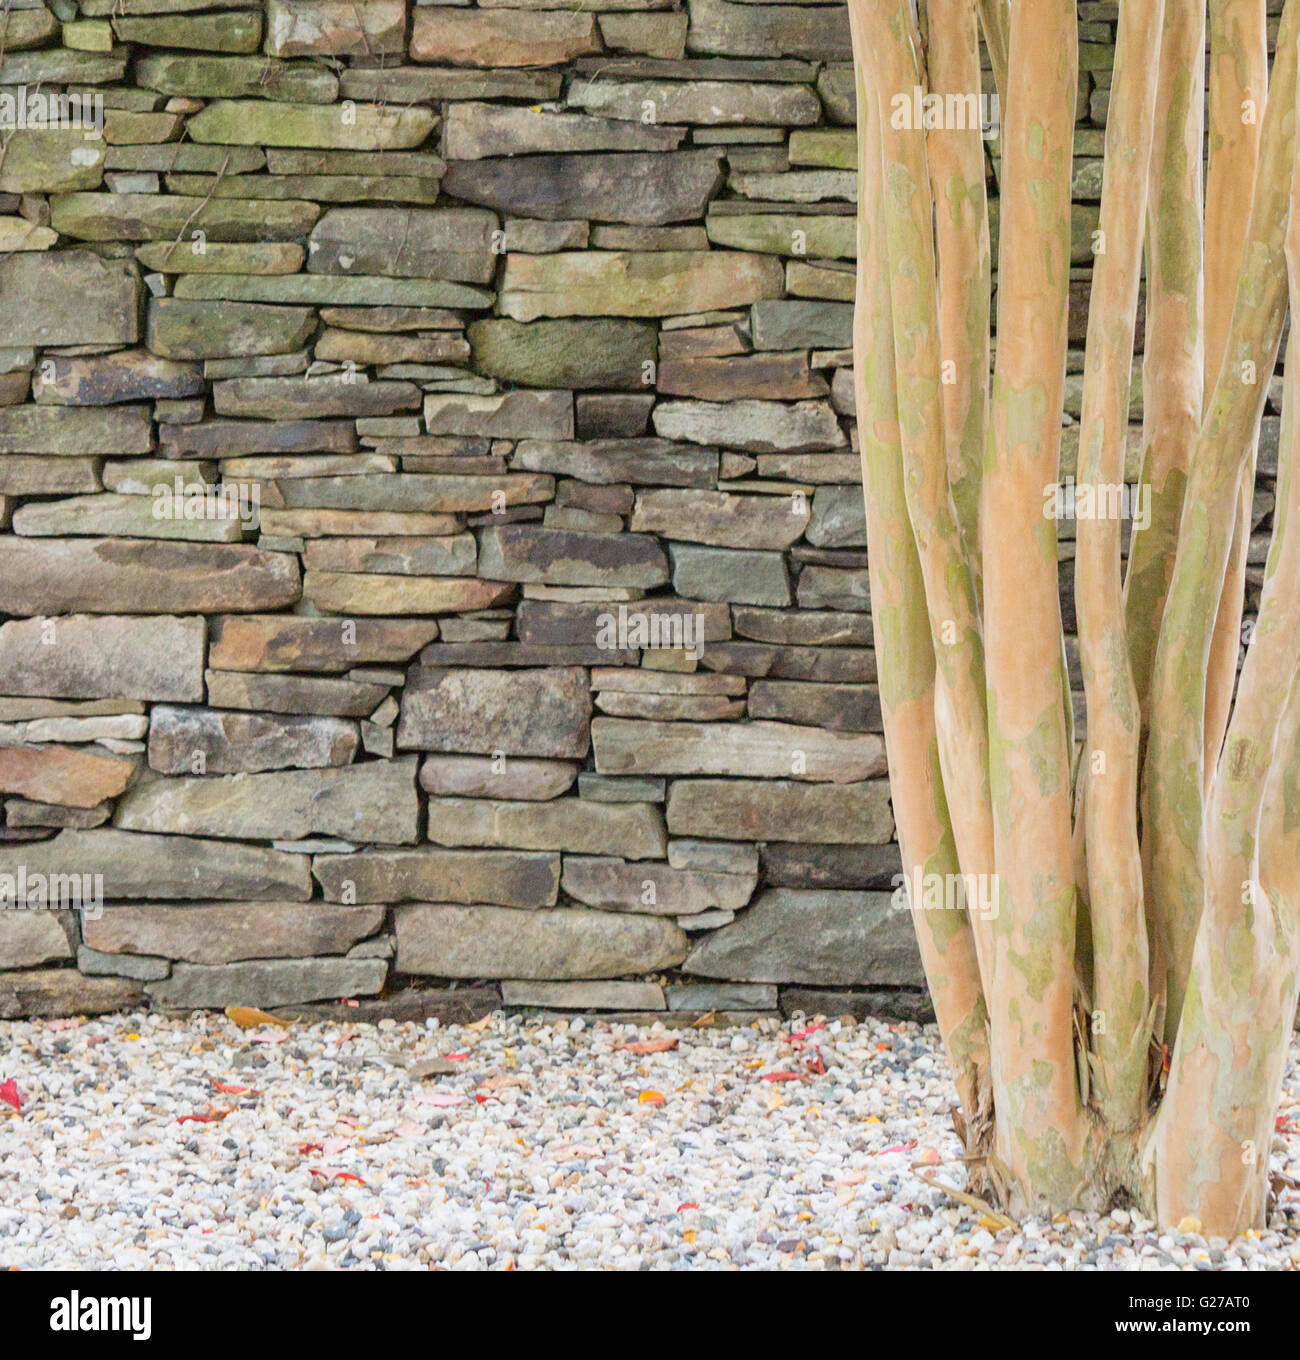 detail of a dry stone wall with gravel and the trunks of a tree, creating three elements or planes Stock Photo